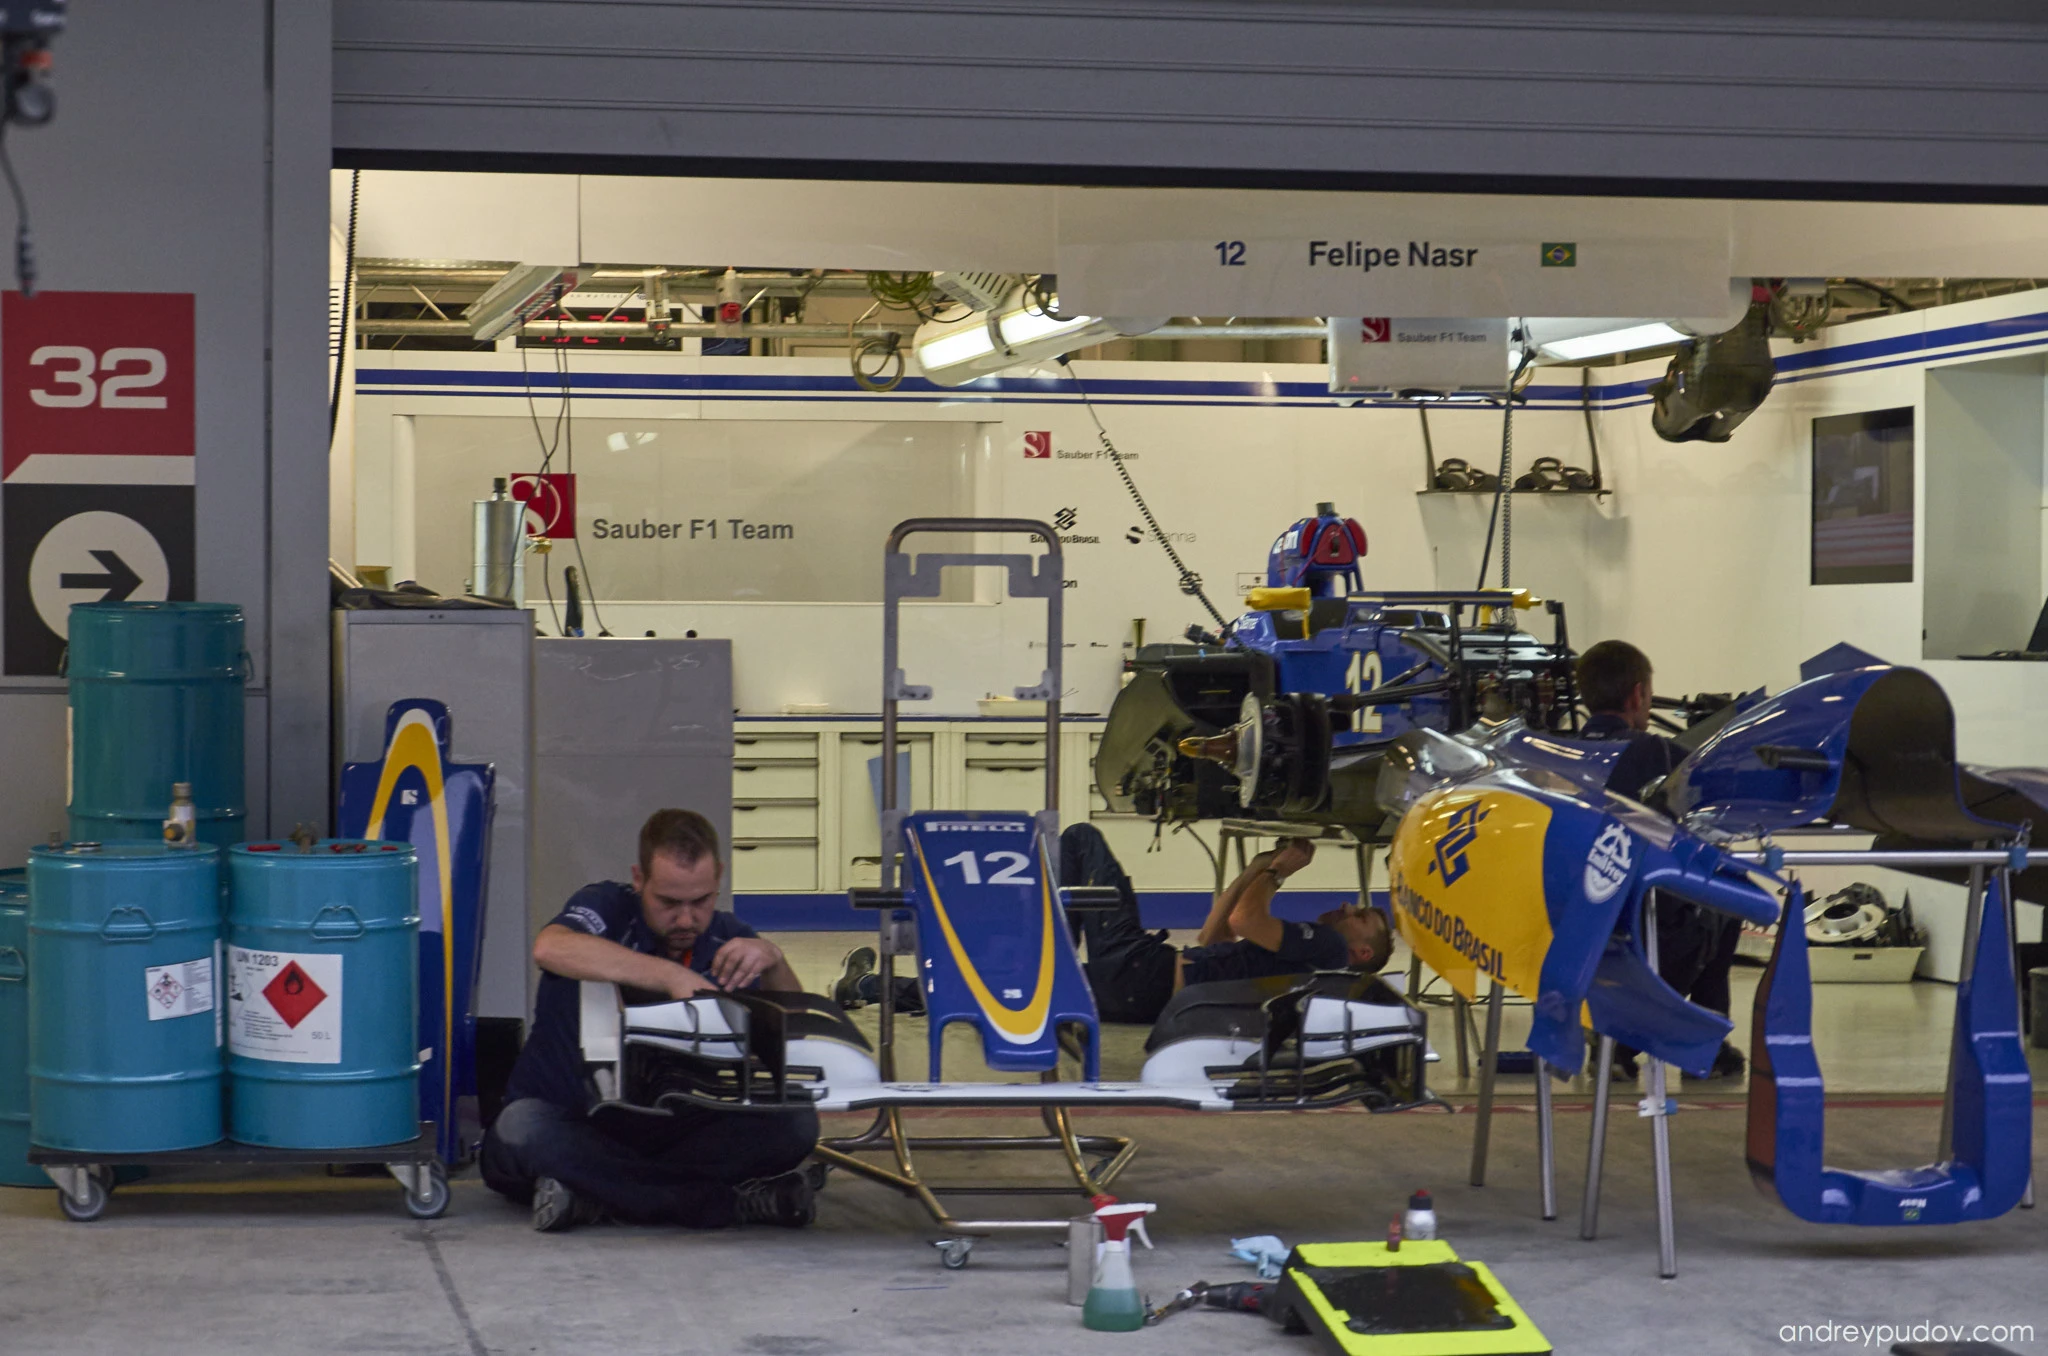 2015 Formula 1 Russian Grand Prix - Sauber F1 Team mechanics are hard at work.

The Sauber F1 Team is a Swiss Formula One team. Founded in 1970 by Peter Sauber, the team entered F1 in 1993 and experienced a moderate amount of success (but no wins) before being sold to BMW after the 2005 season and being renamed BMW Sauber for 2006, winning a race in 2008. After 2009, BMW decided to end its involvement in the sport and sold the team back to Peter Sauber. The team ran as "BMW Sauber" in 2010 (using Ferrari engines) for the TV money, before reverting back to "Sauber" in 2011.